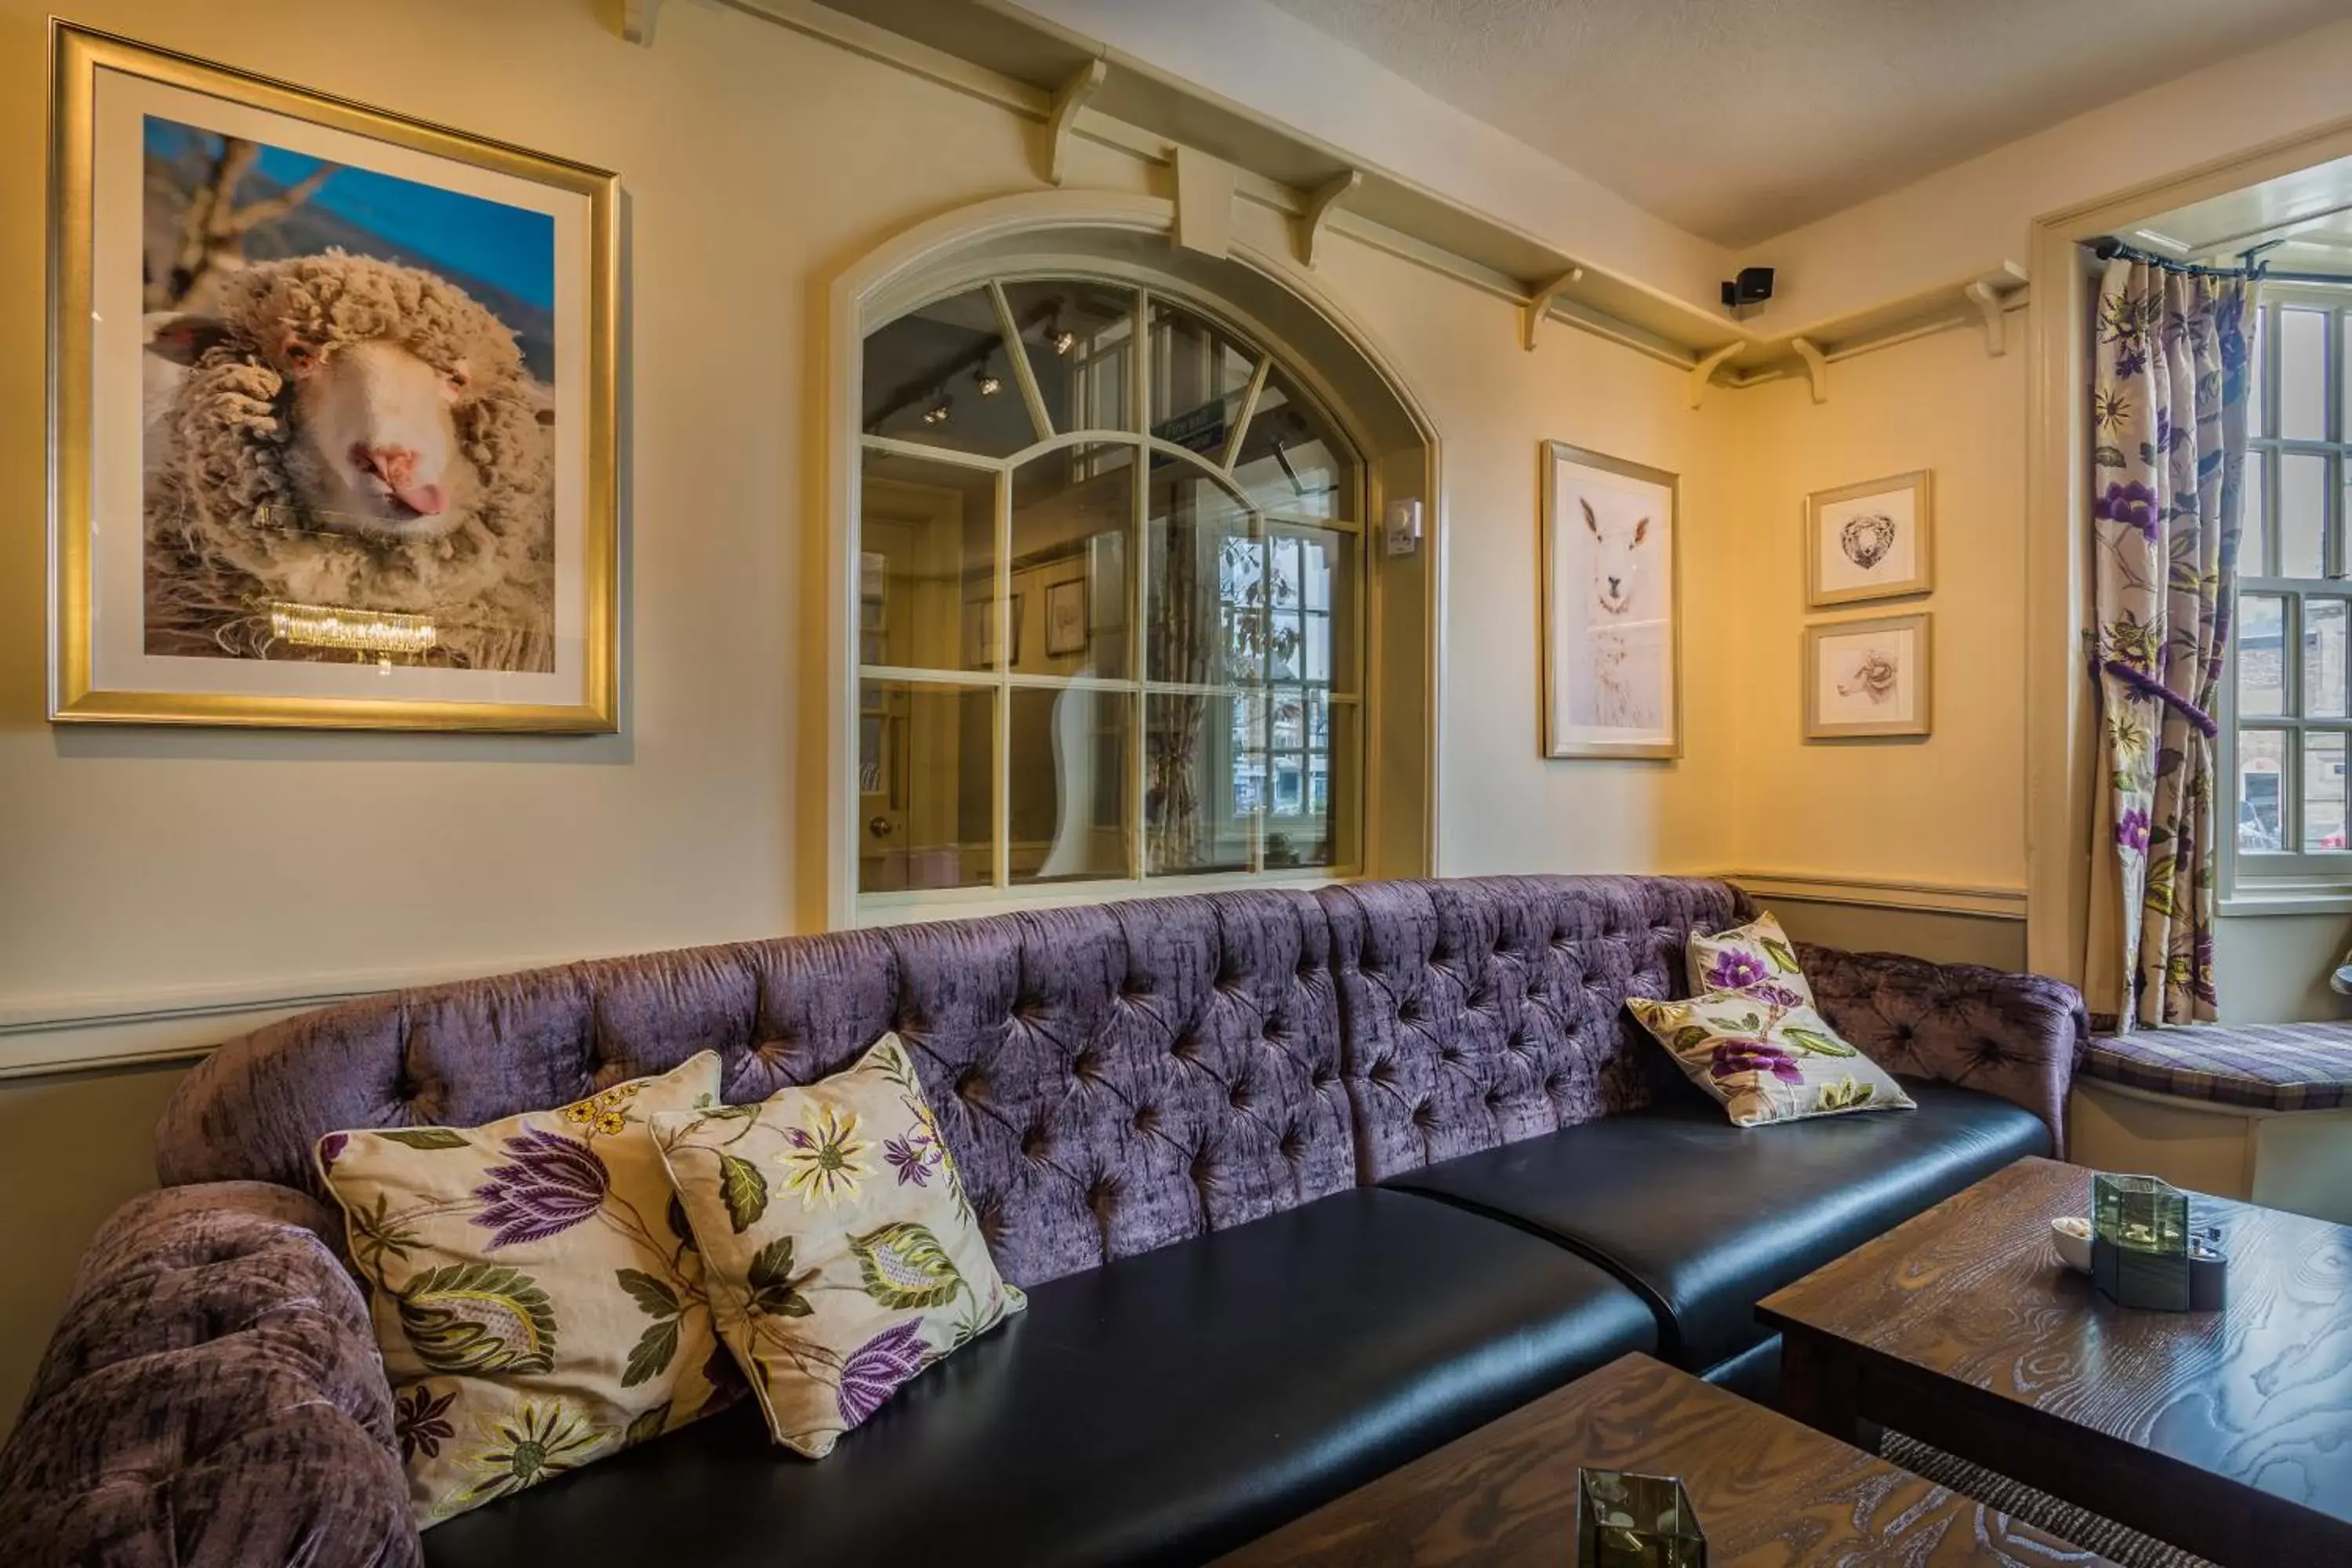 Seating Area in The Golden Fleece Hotel, Thirsk, North Yorkshire